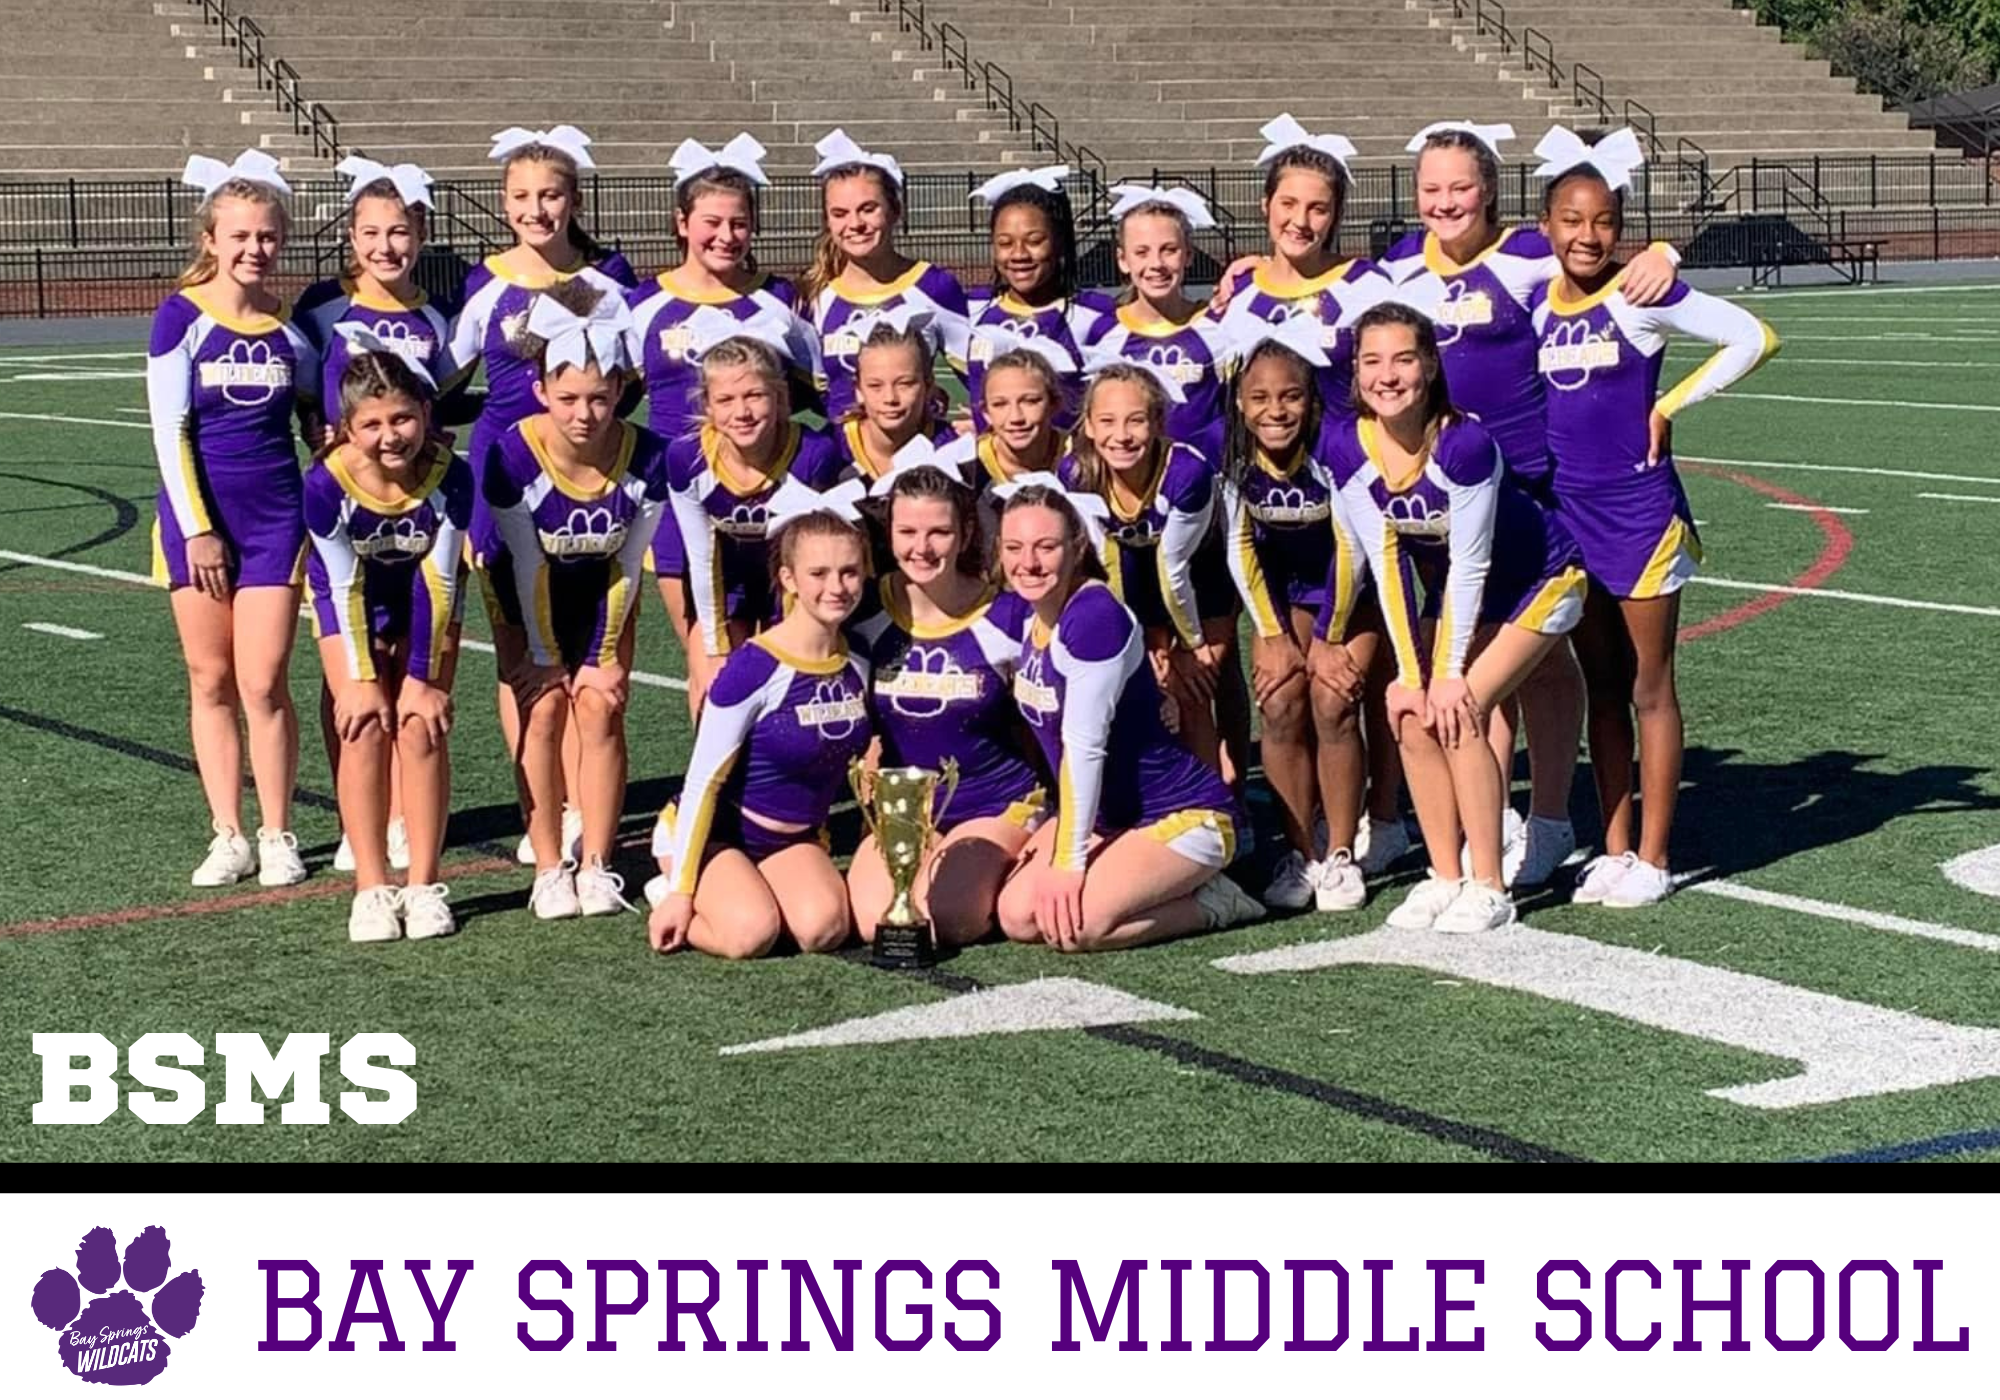 Bay springs middle school cheer picture